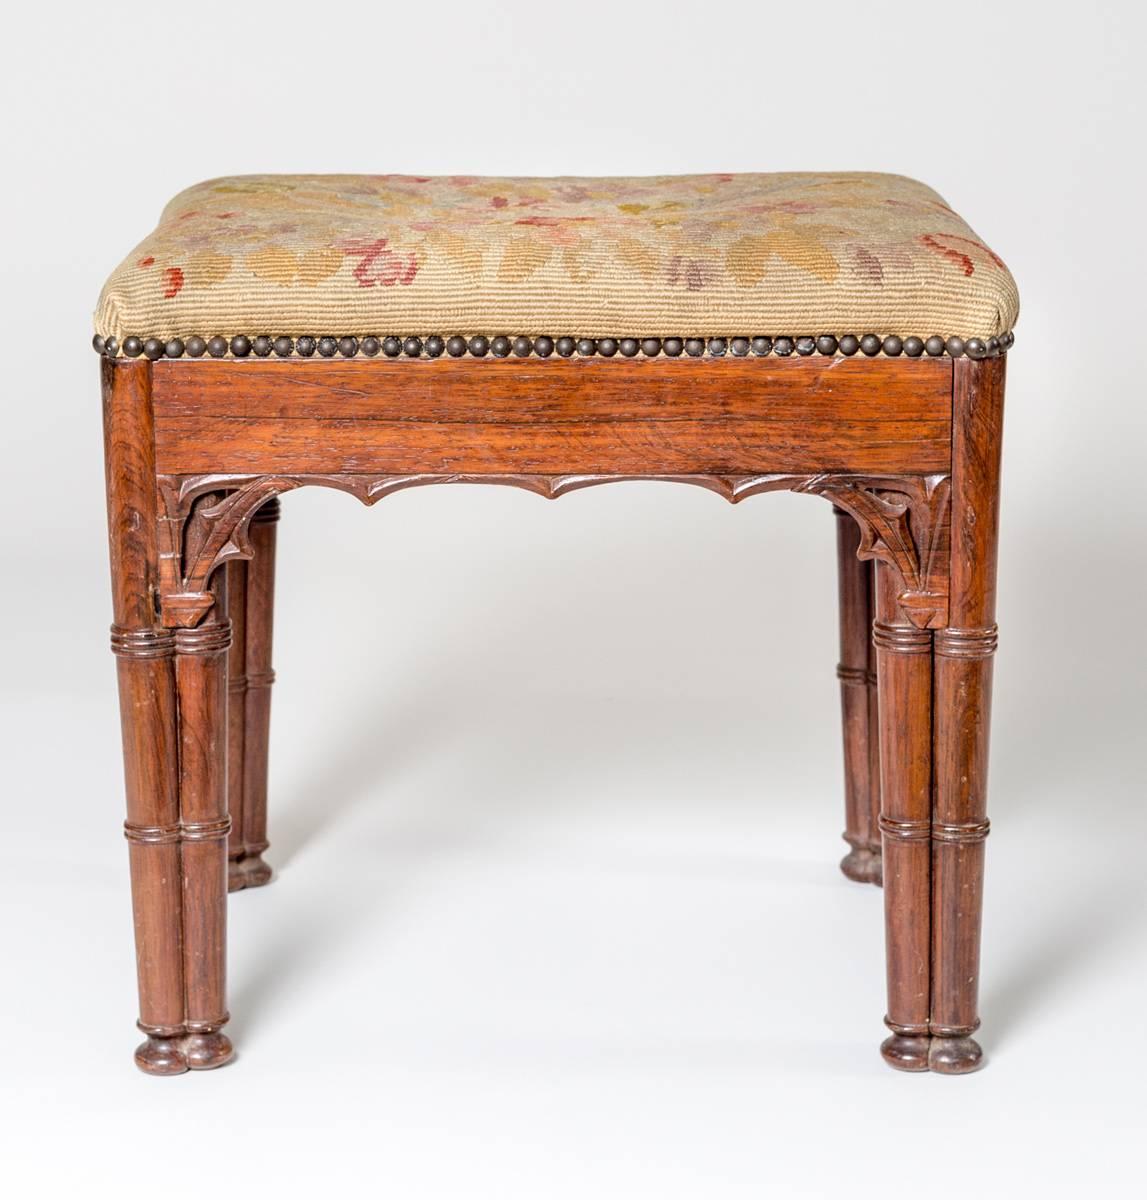 Victorian rosewood Gothic Revival stool, the apron with arched moldings, supported by tri-cluster column legs with ring turnings, the seat covered in a needlework decorated with two birds and flowers with brass nailheads.